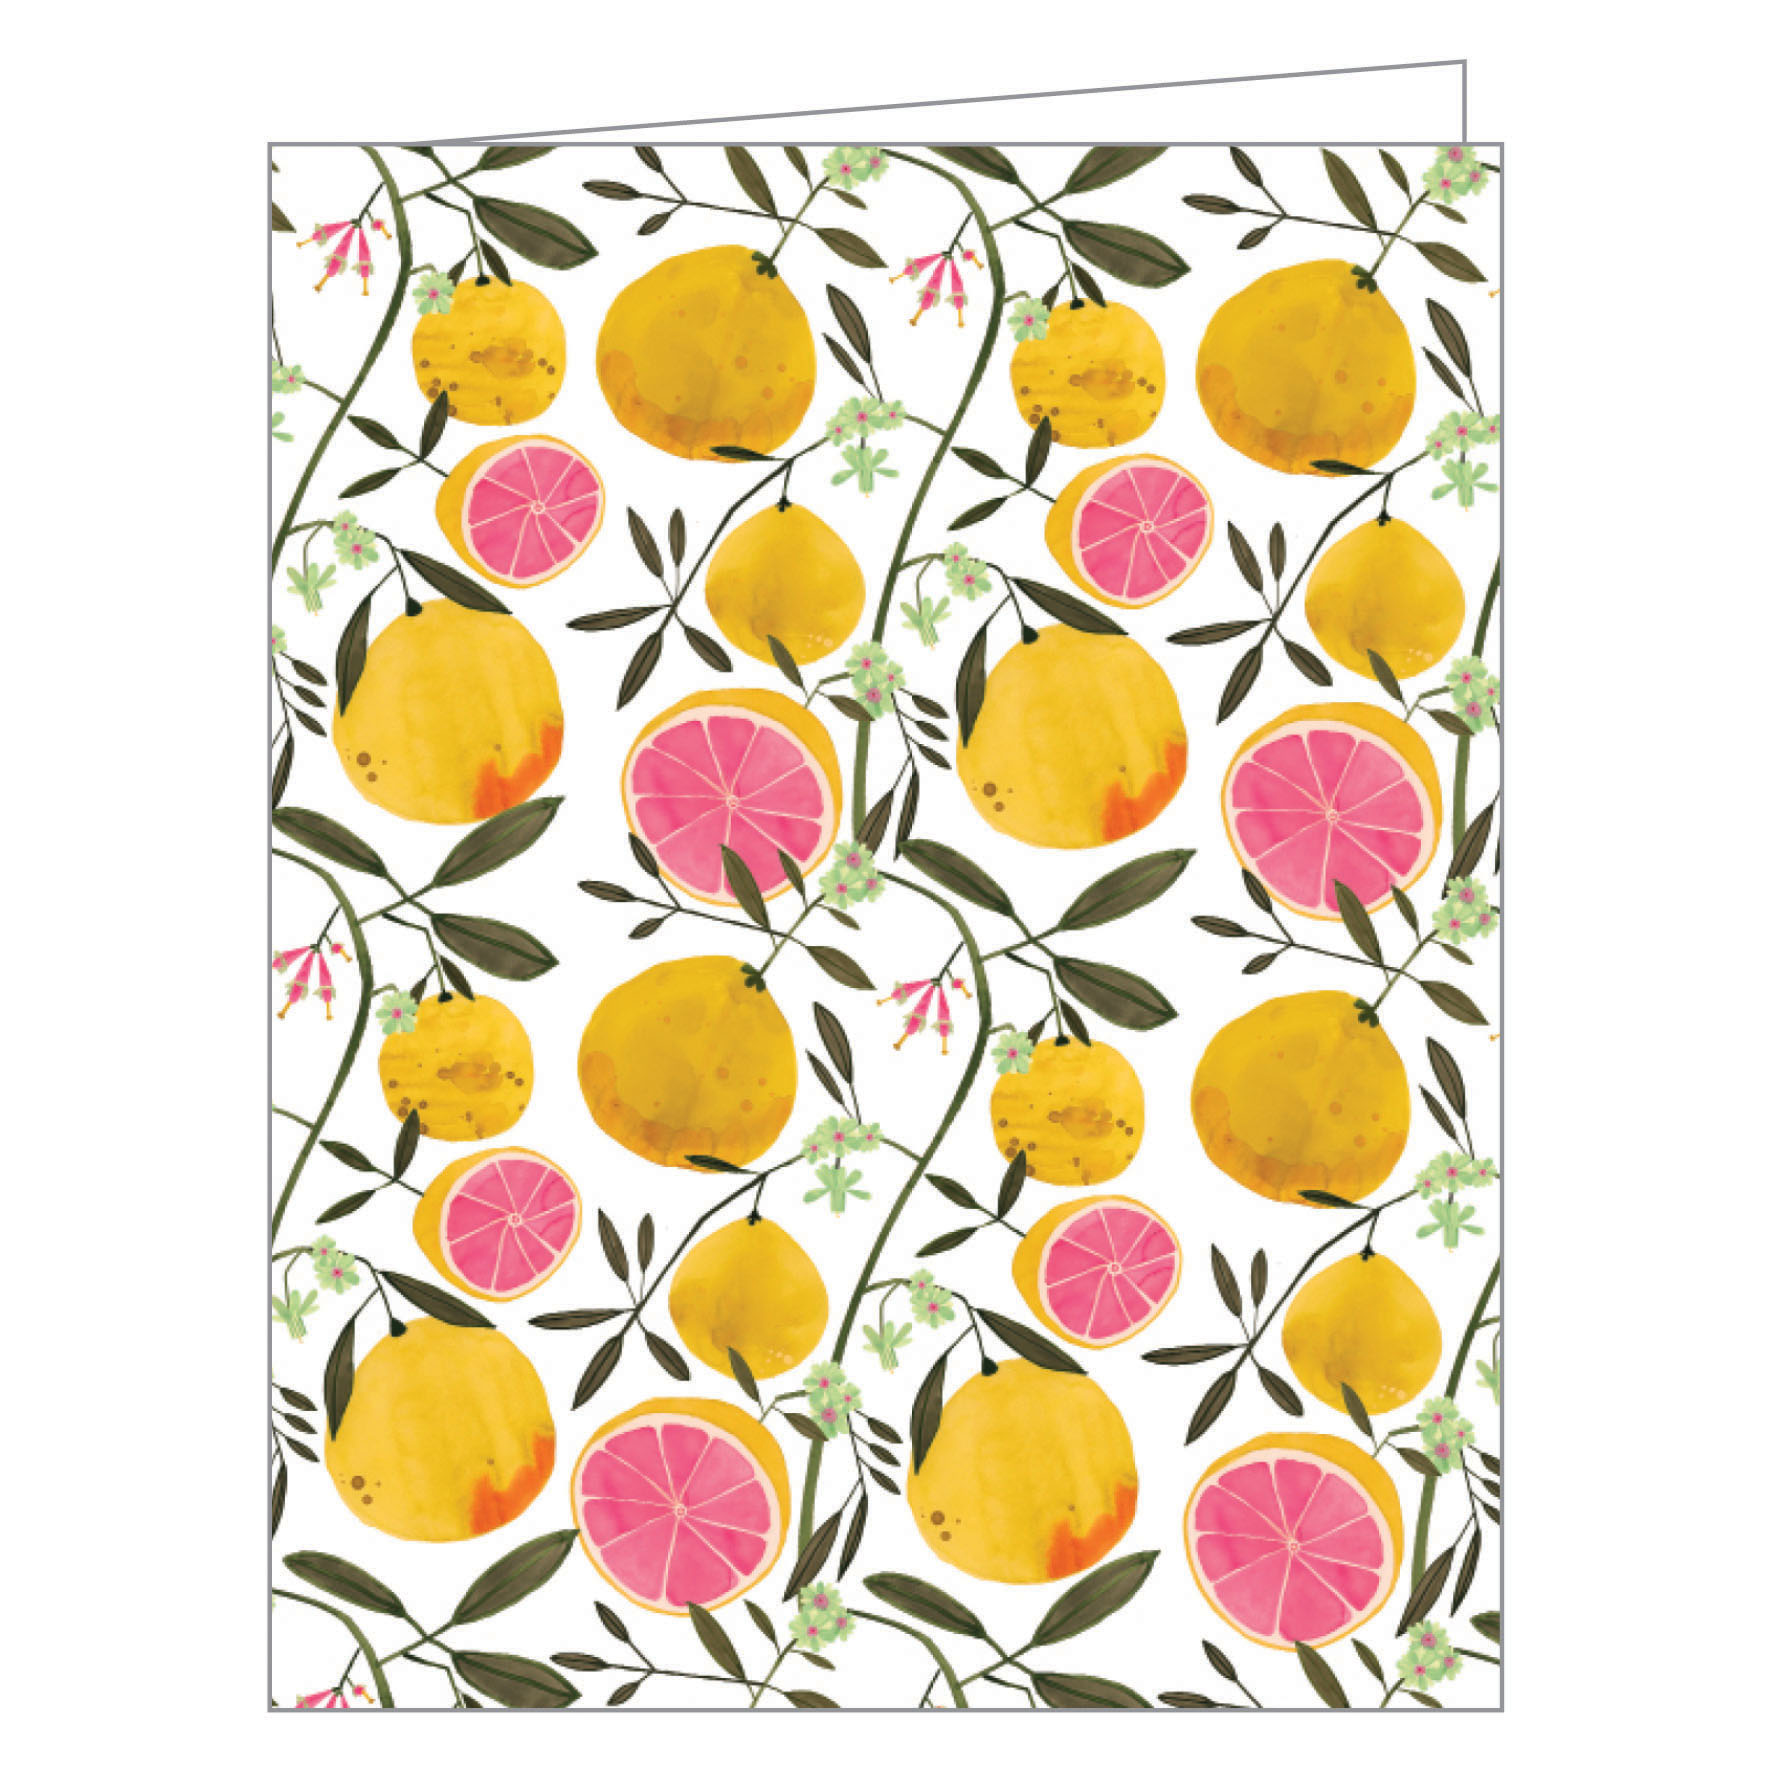 Anisa Makhoul's summery grapefruit and flowers design, to notecard, by teNeues Stationery.